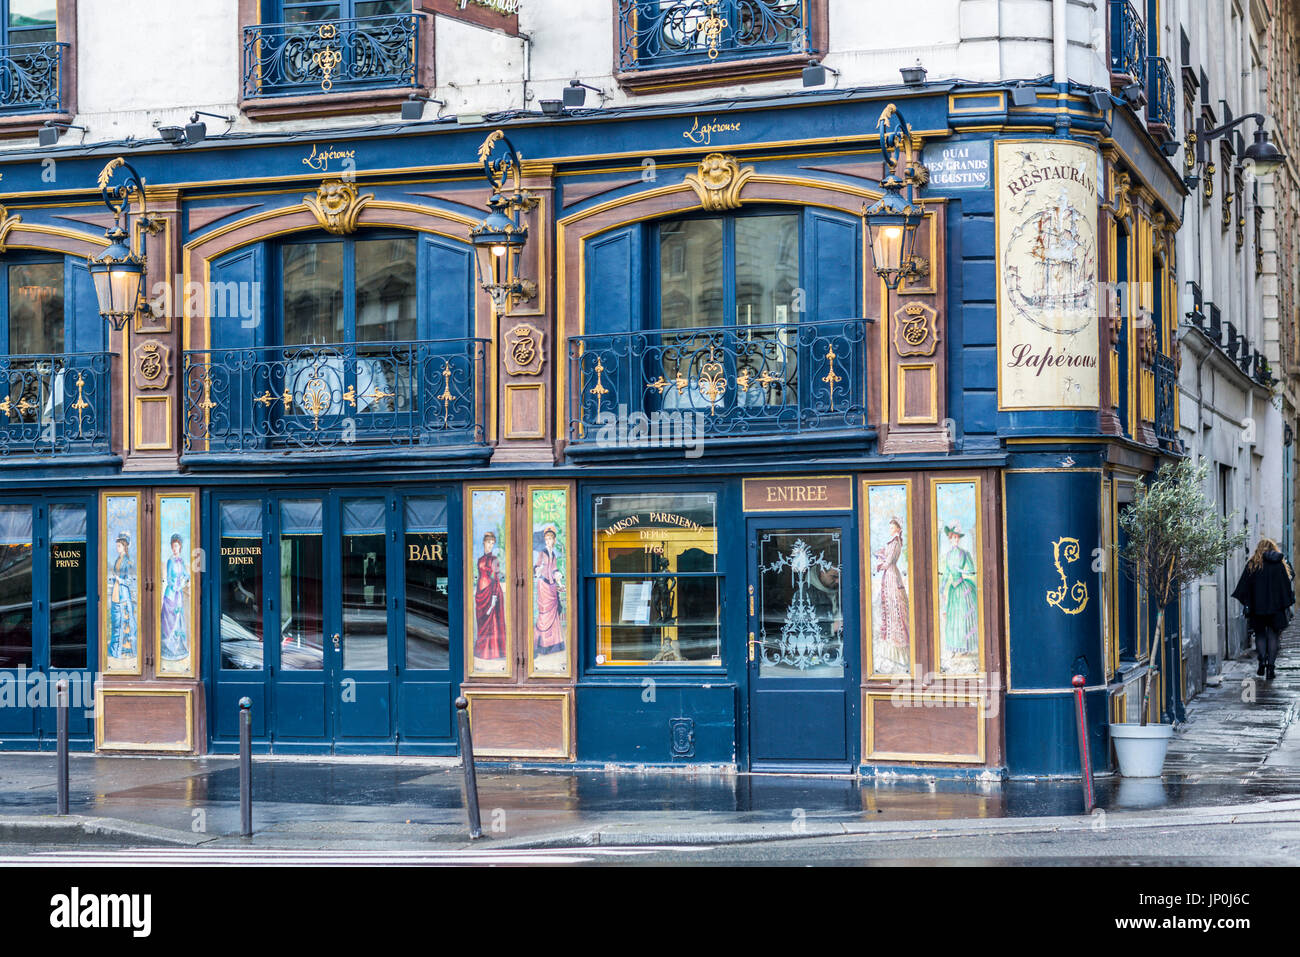 Paris, France - March 2, 2016: Exterior of the historic Restaurant Laperouse on Quai des Grands Augustins on the Left Bank between Pont Neuf and Pont Saint-Michel in Paris. Stock Photo